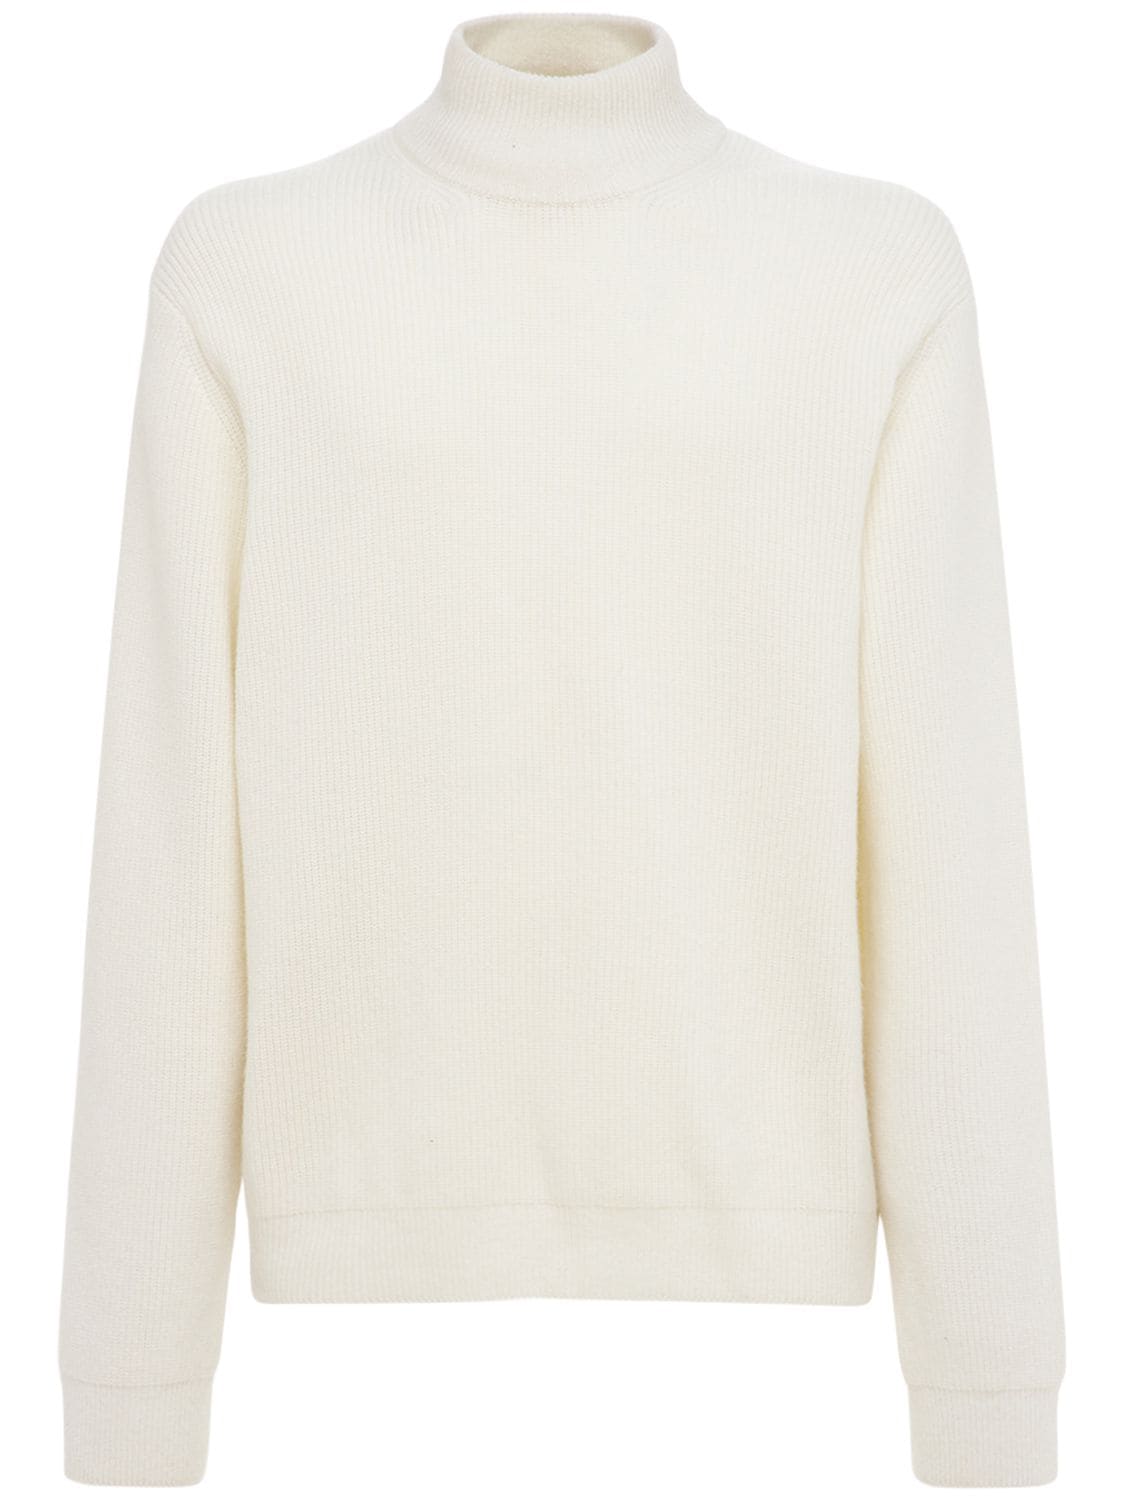 Solid Homme Wool Knit Turtleneck Sweater In White